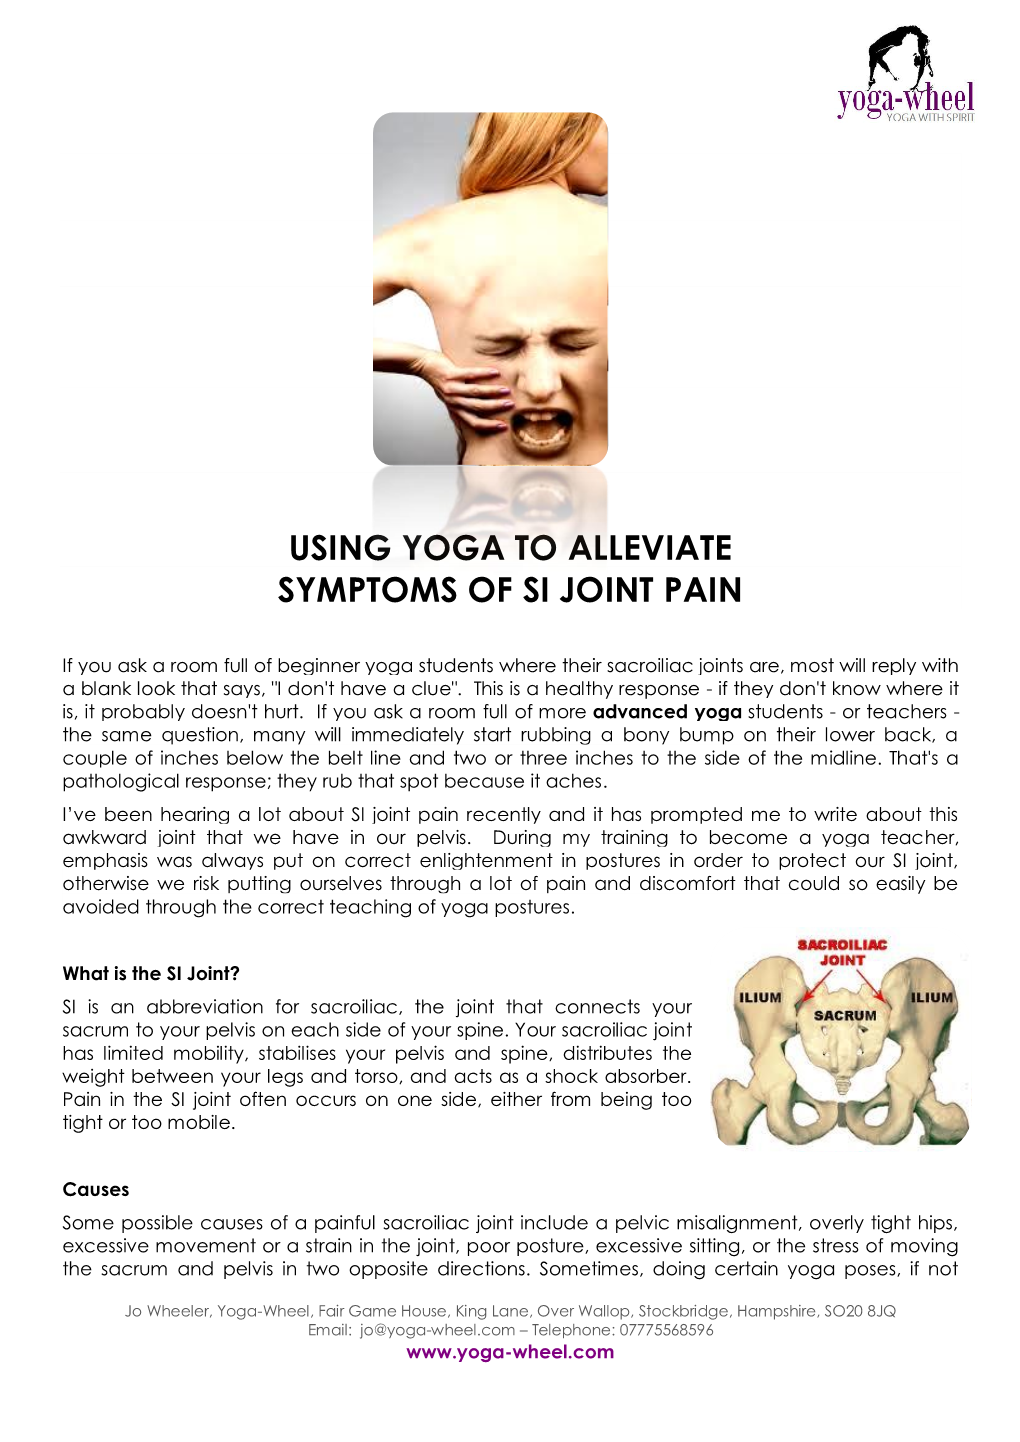 Using Yoga to Alleviate Symptoms of Si Joint Pain